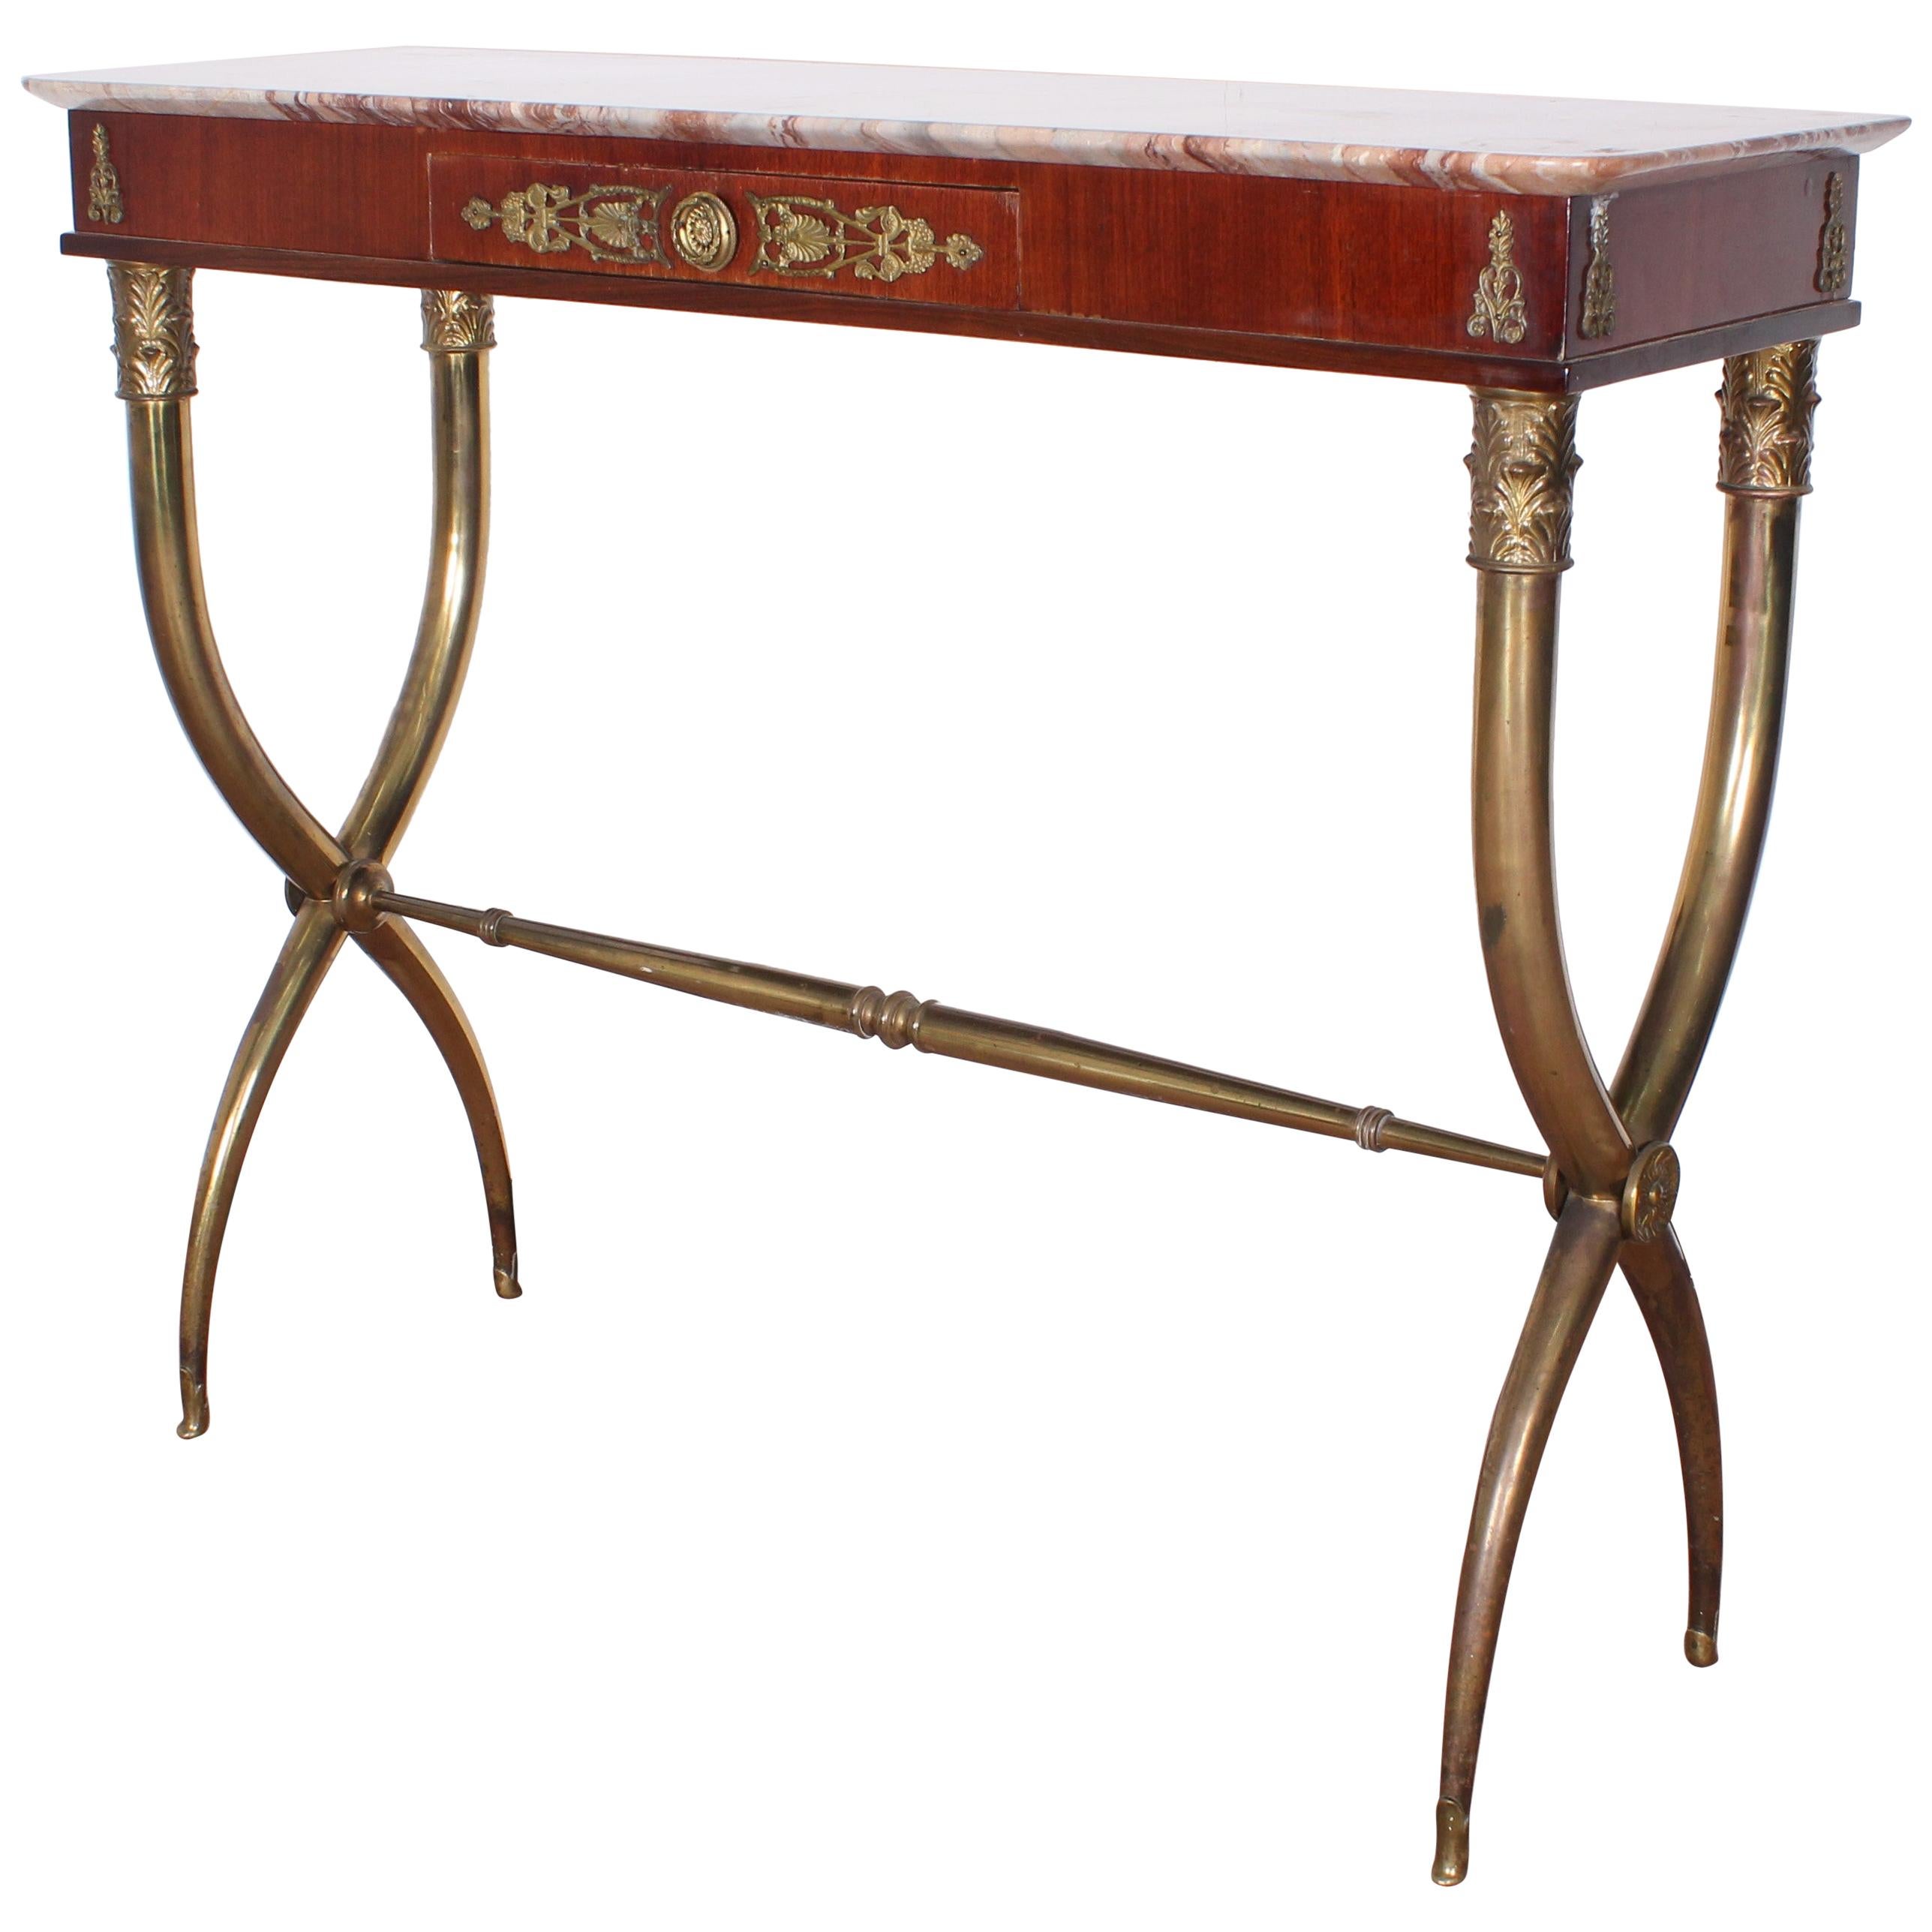  Midcentury wood, Marble and Brass Console Table, Italy 1950s